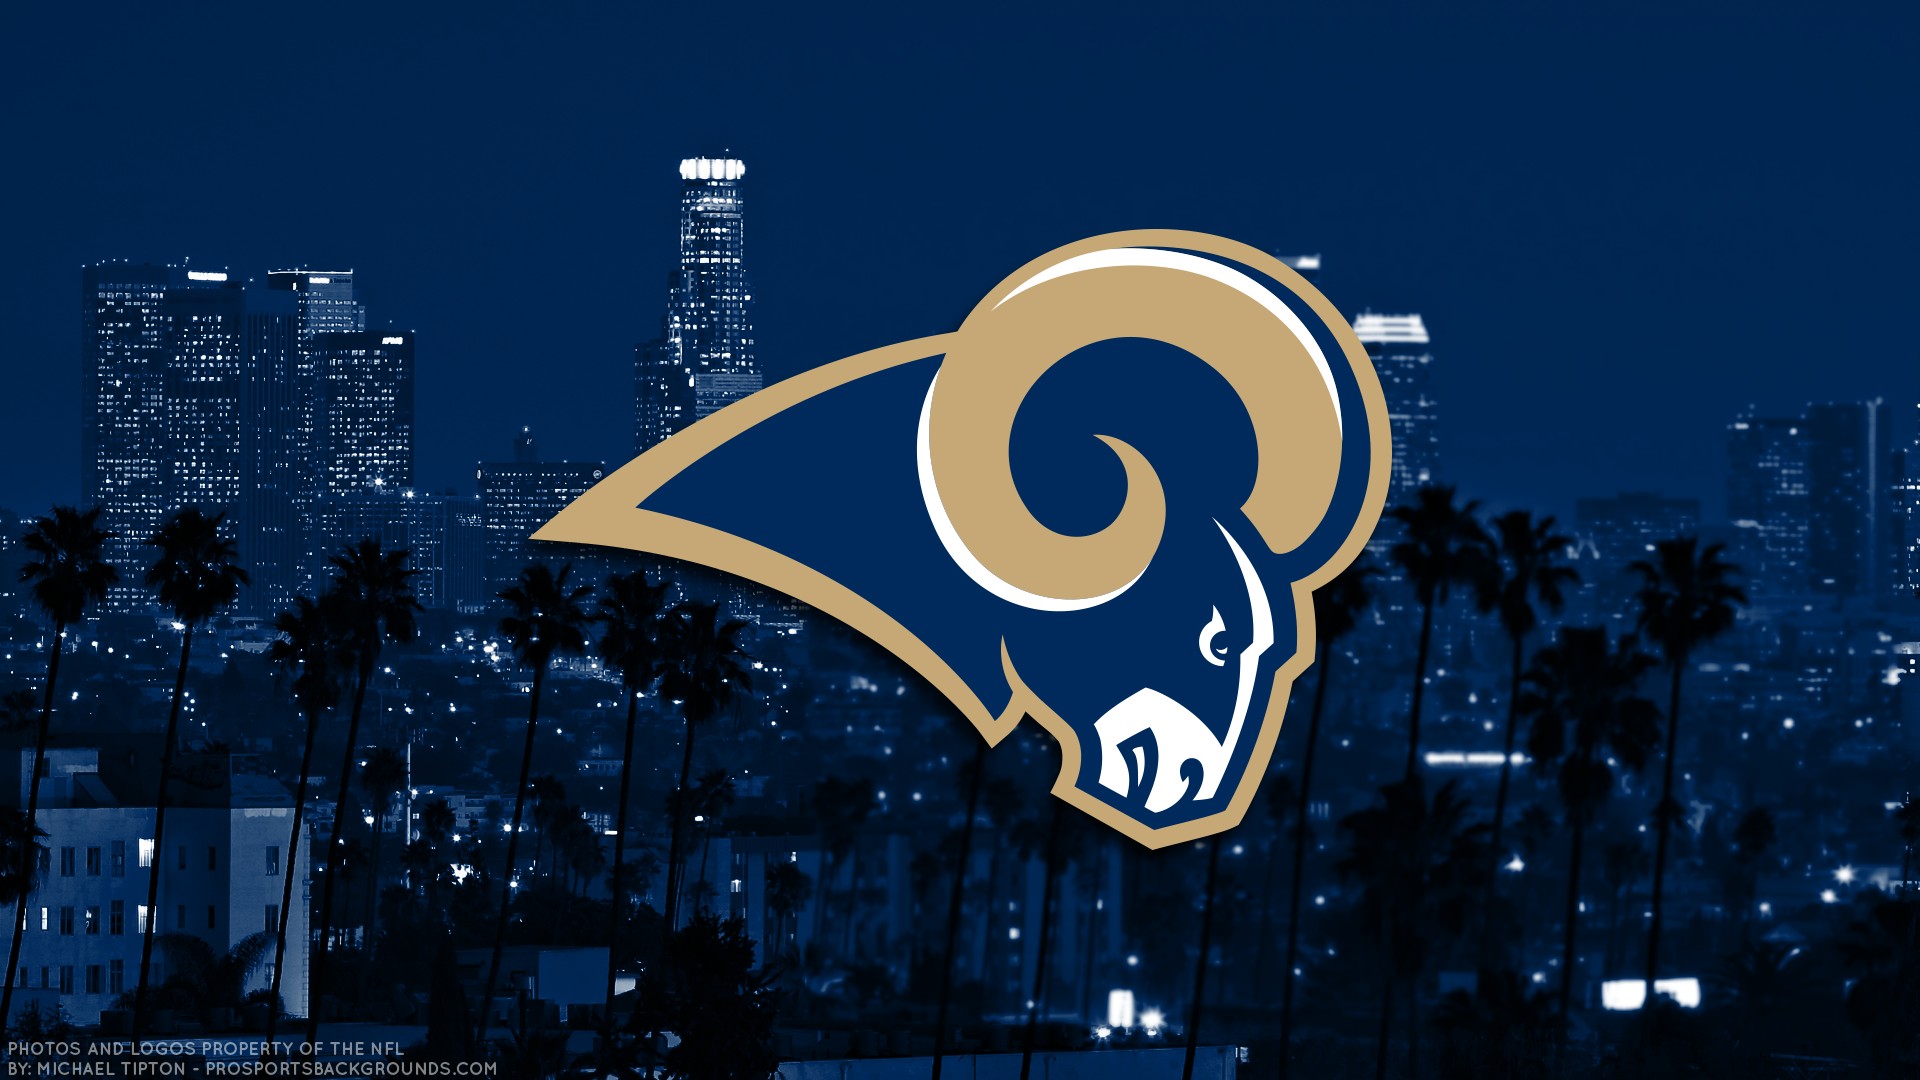 HD Desktop Wallpaper Los Angeles Rams With Resolution 1920X1080 pixel. You can make this wallpaper for your Mac or Windows Desktop Background, iPhone, Android or Tablet and another Smartphone device for free